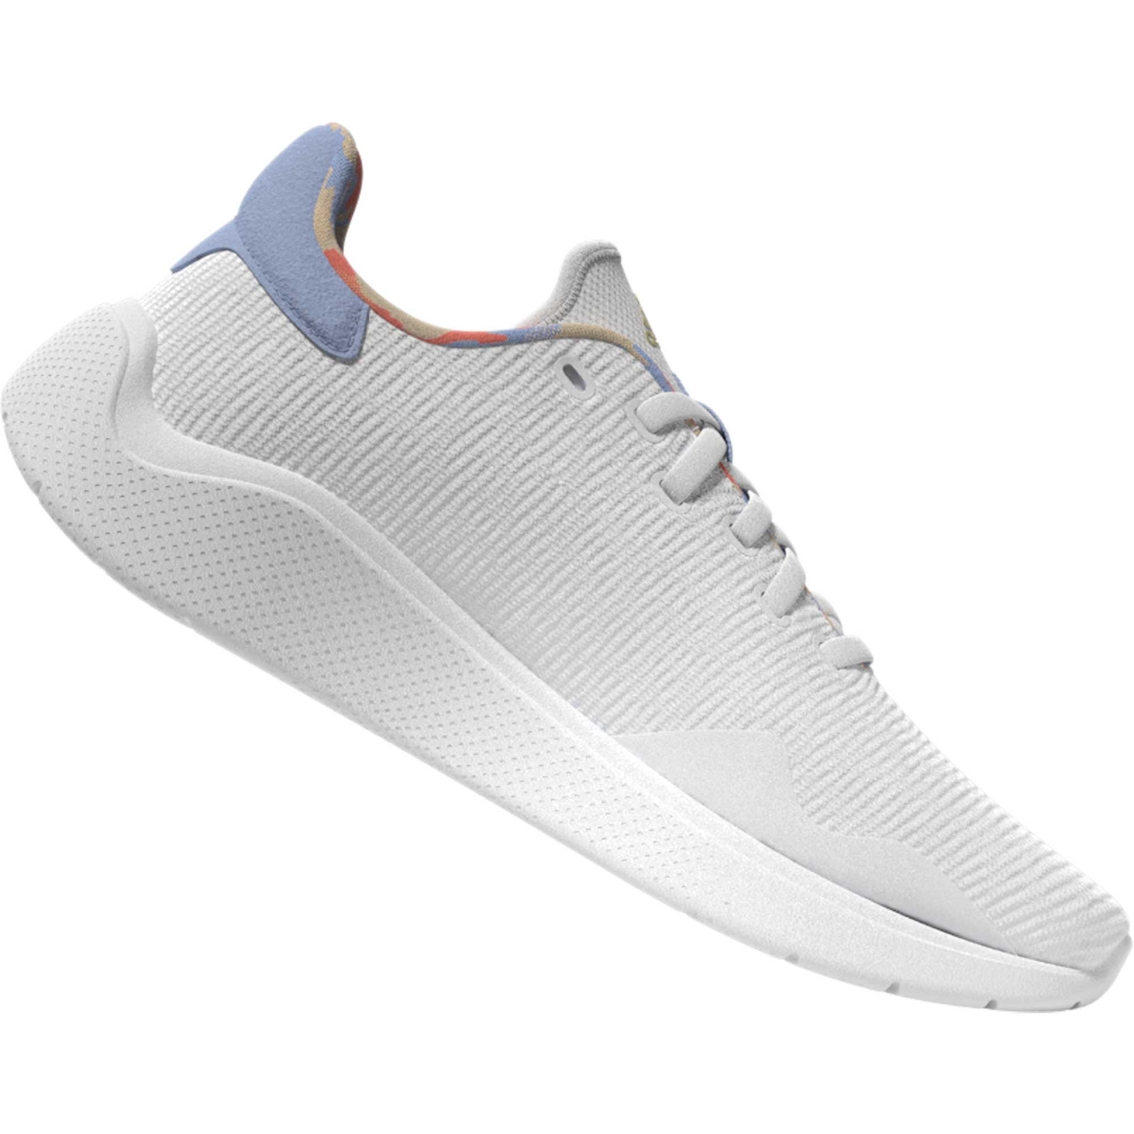 Adidas Women's Puremotion 2.0 Sneakers - Image 7 of 10